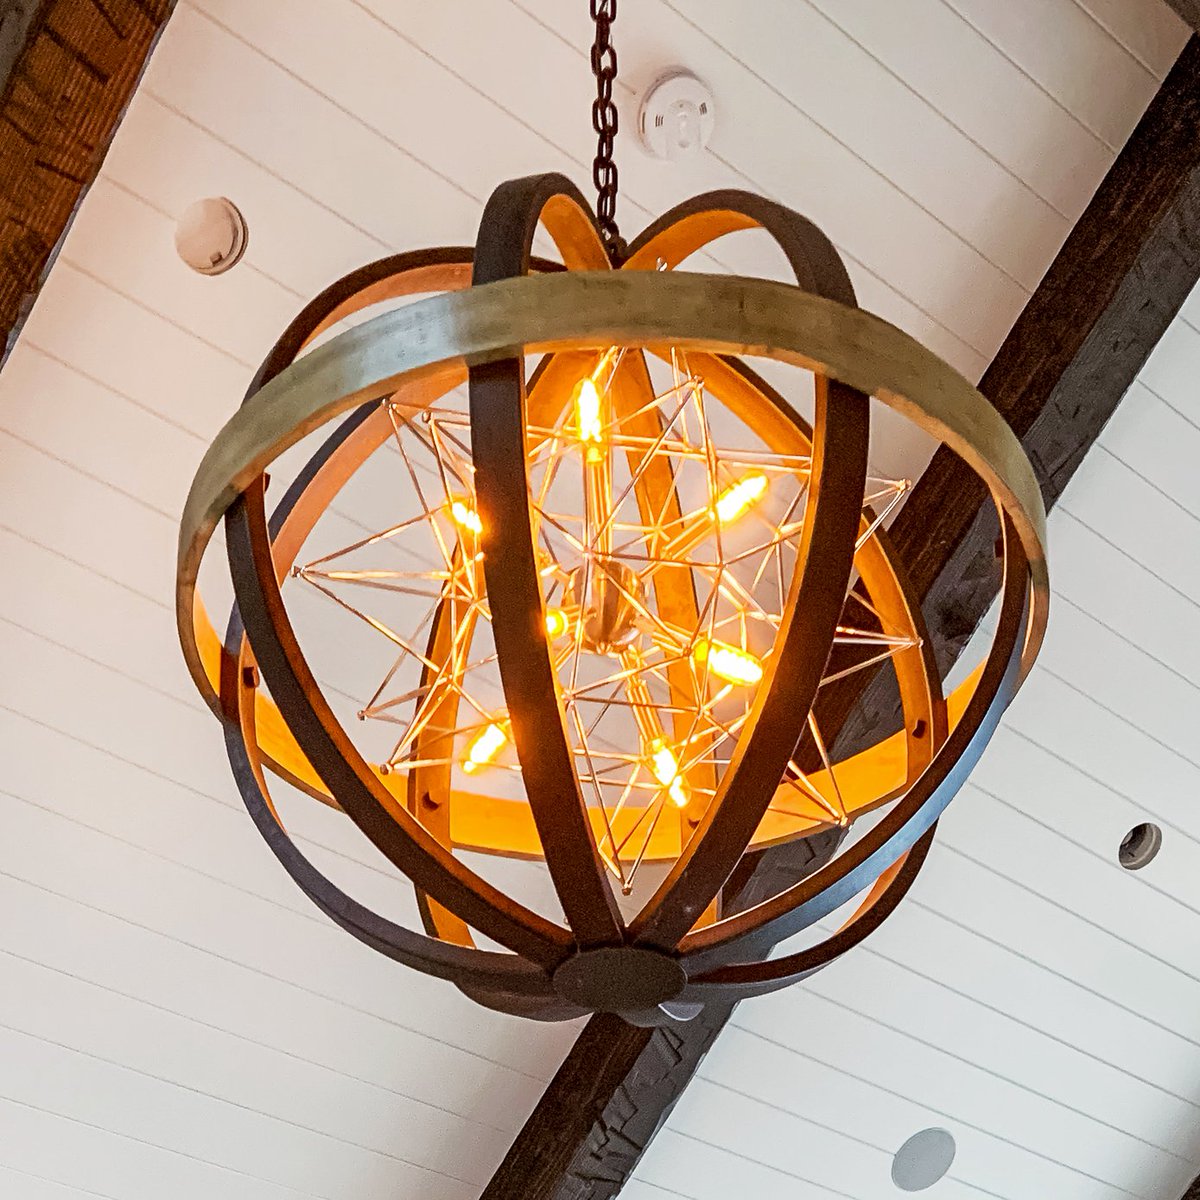 We’ll file this one under “How To Make An Entrance.” 😍 Love this stunning #chandelier design! quietmoose.com #architecture #interiordesign #interiordesigner #homedecor #lakehouse #home #homedesign #coastalliving #entrywaychandelier #entrywaylighting #petoskey